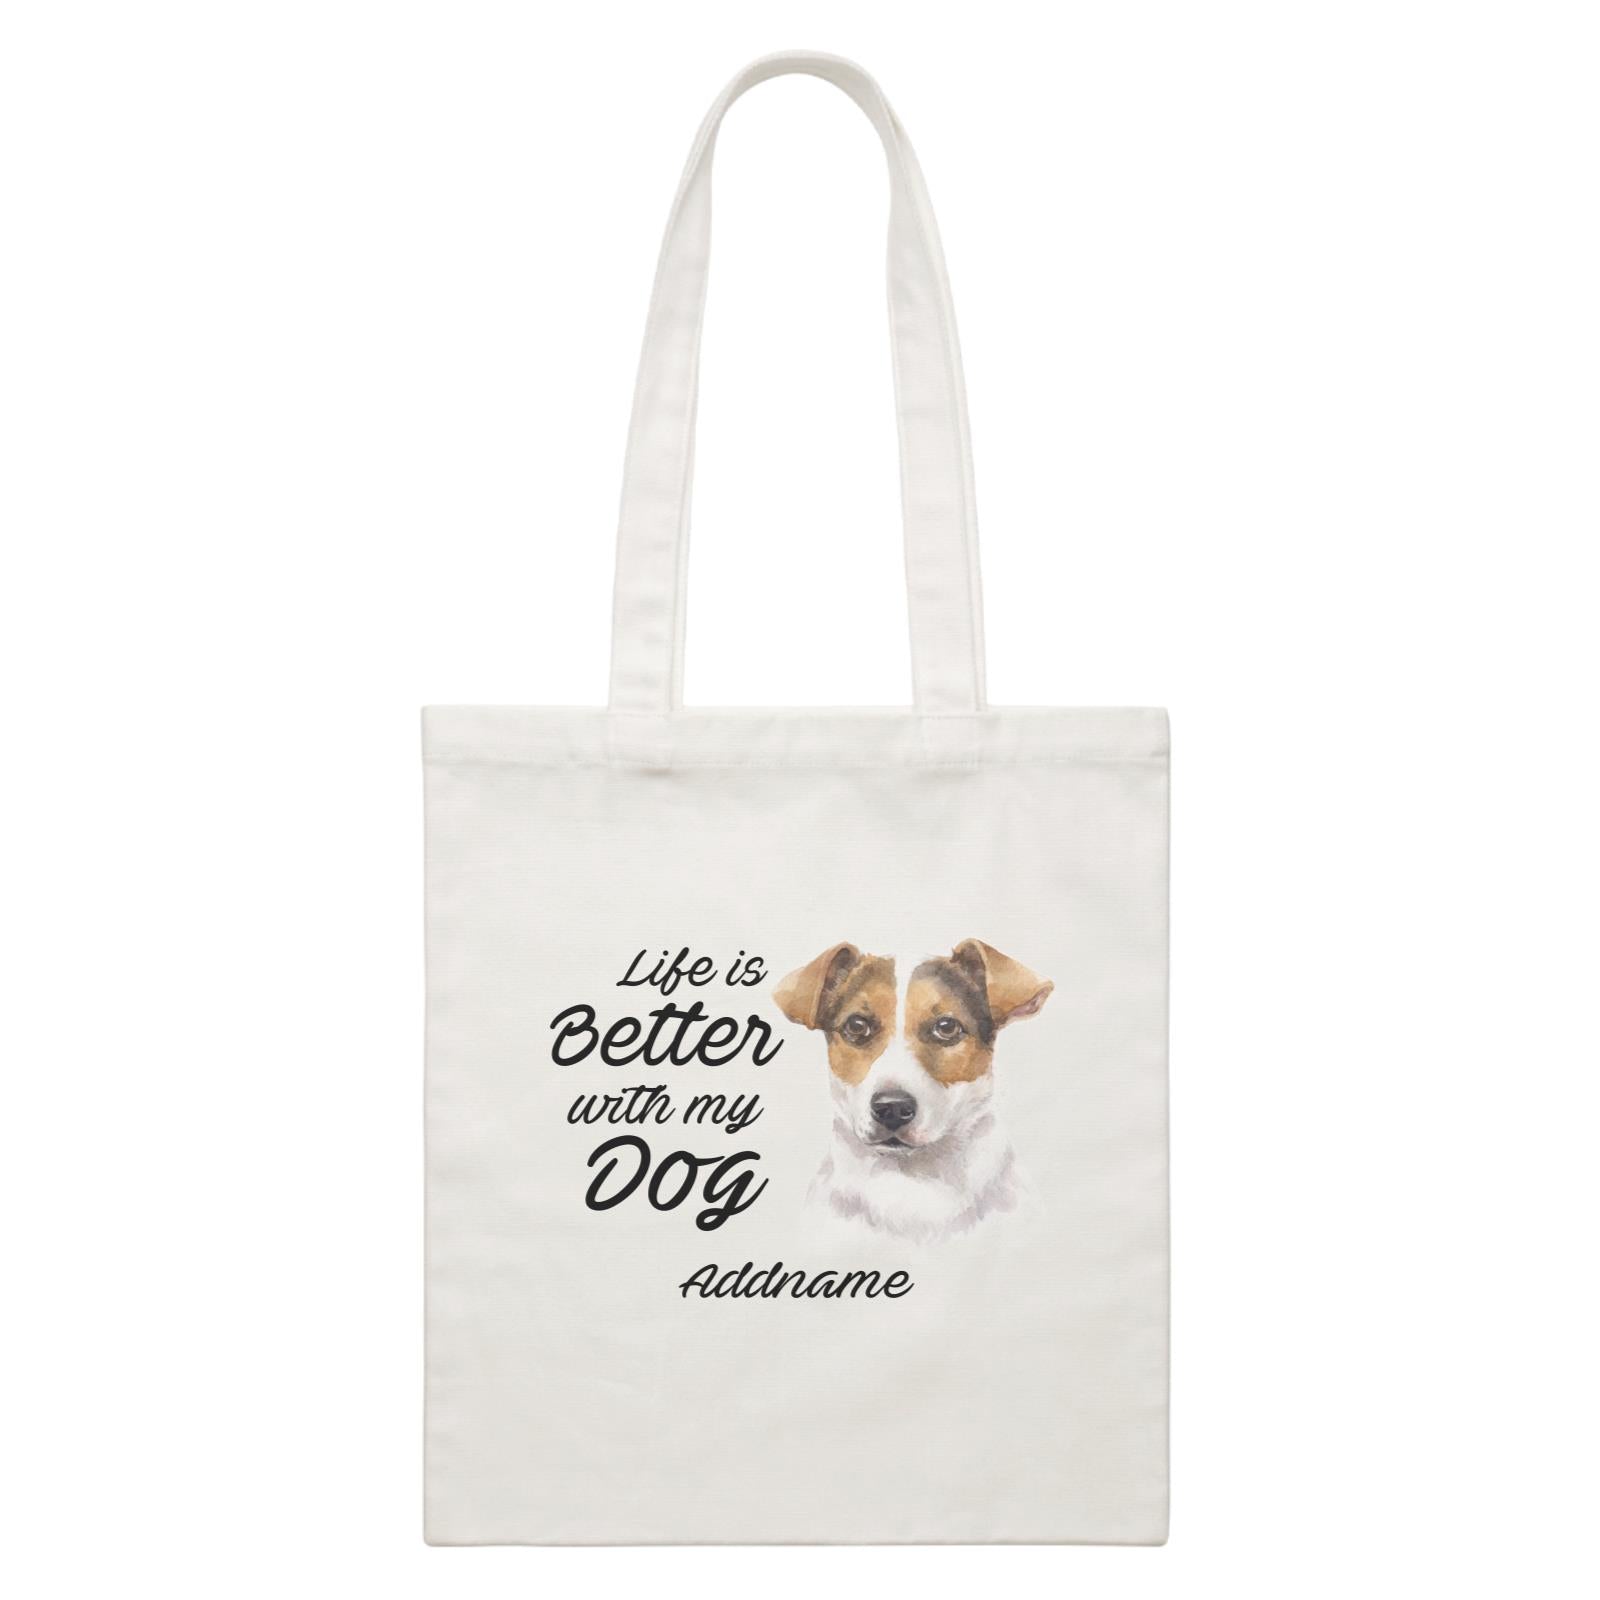 Watercolor Life is Better With My Dog Jack Russell Short Hair Addname White Canvas Bag